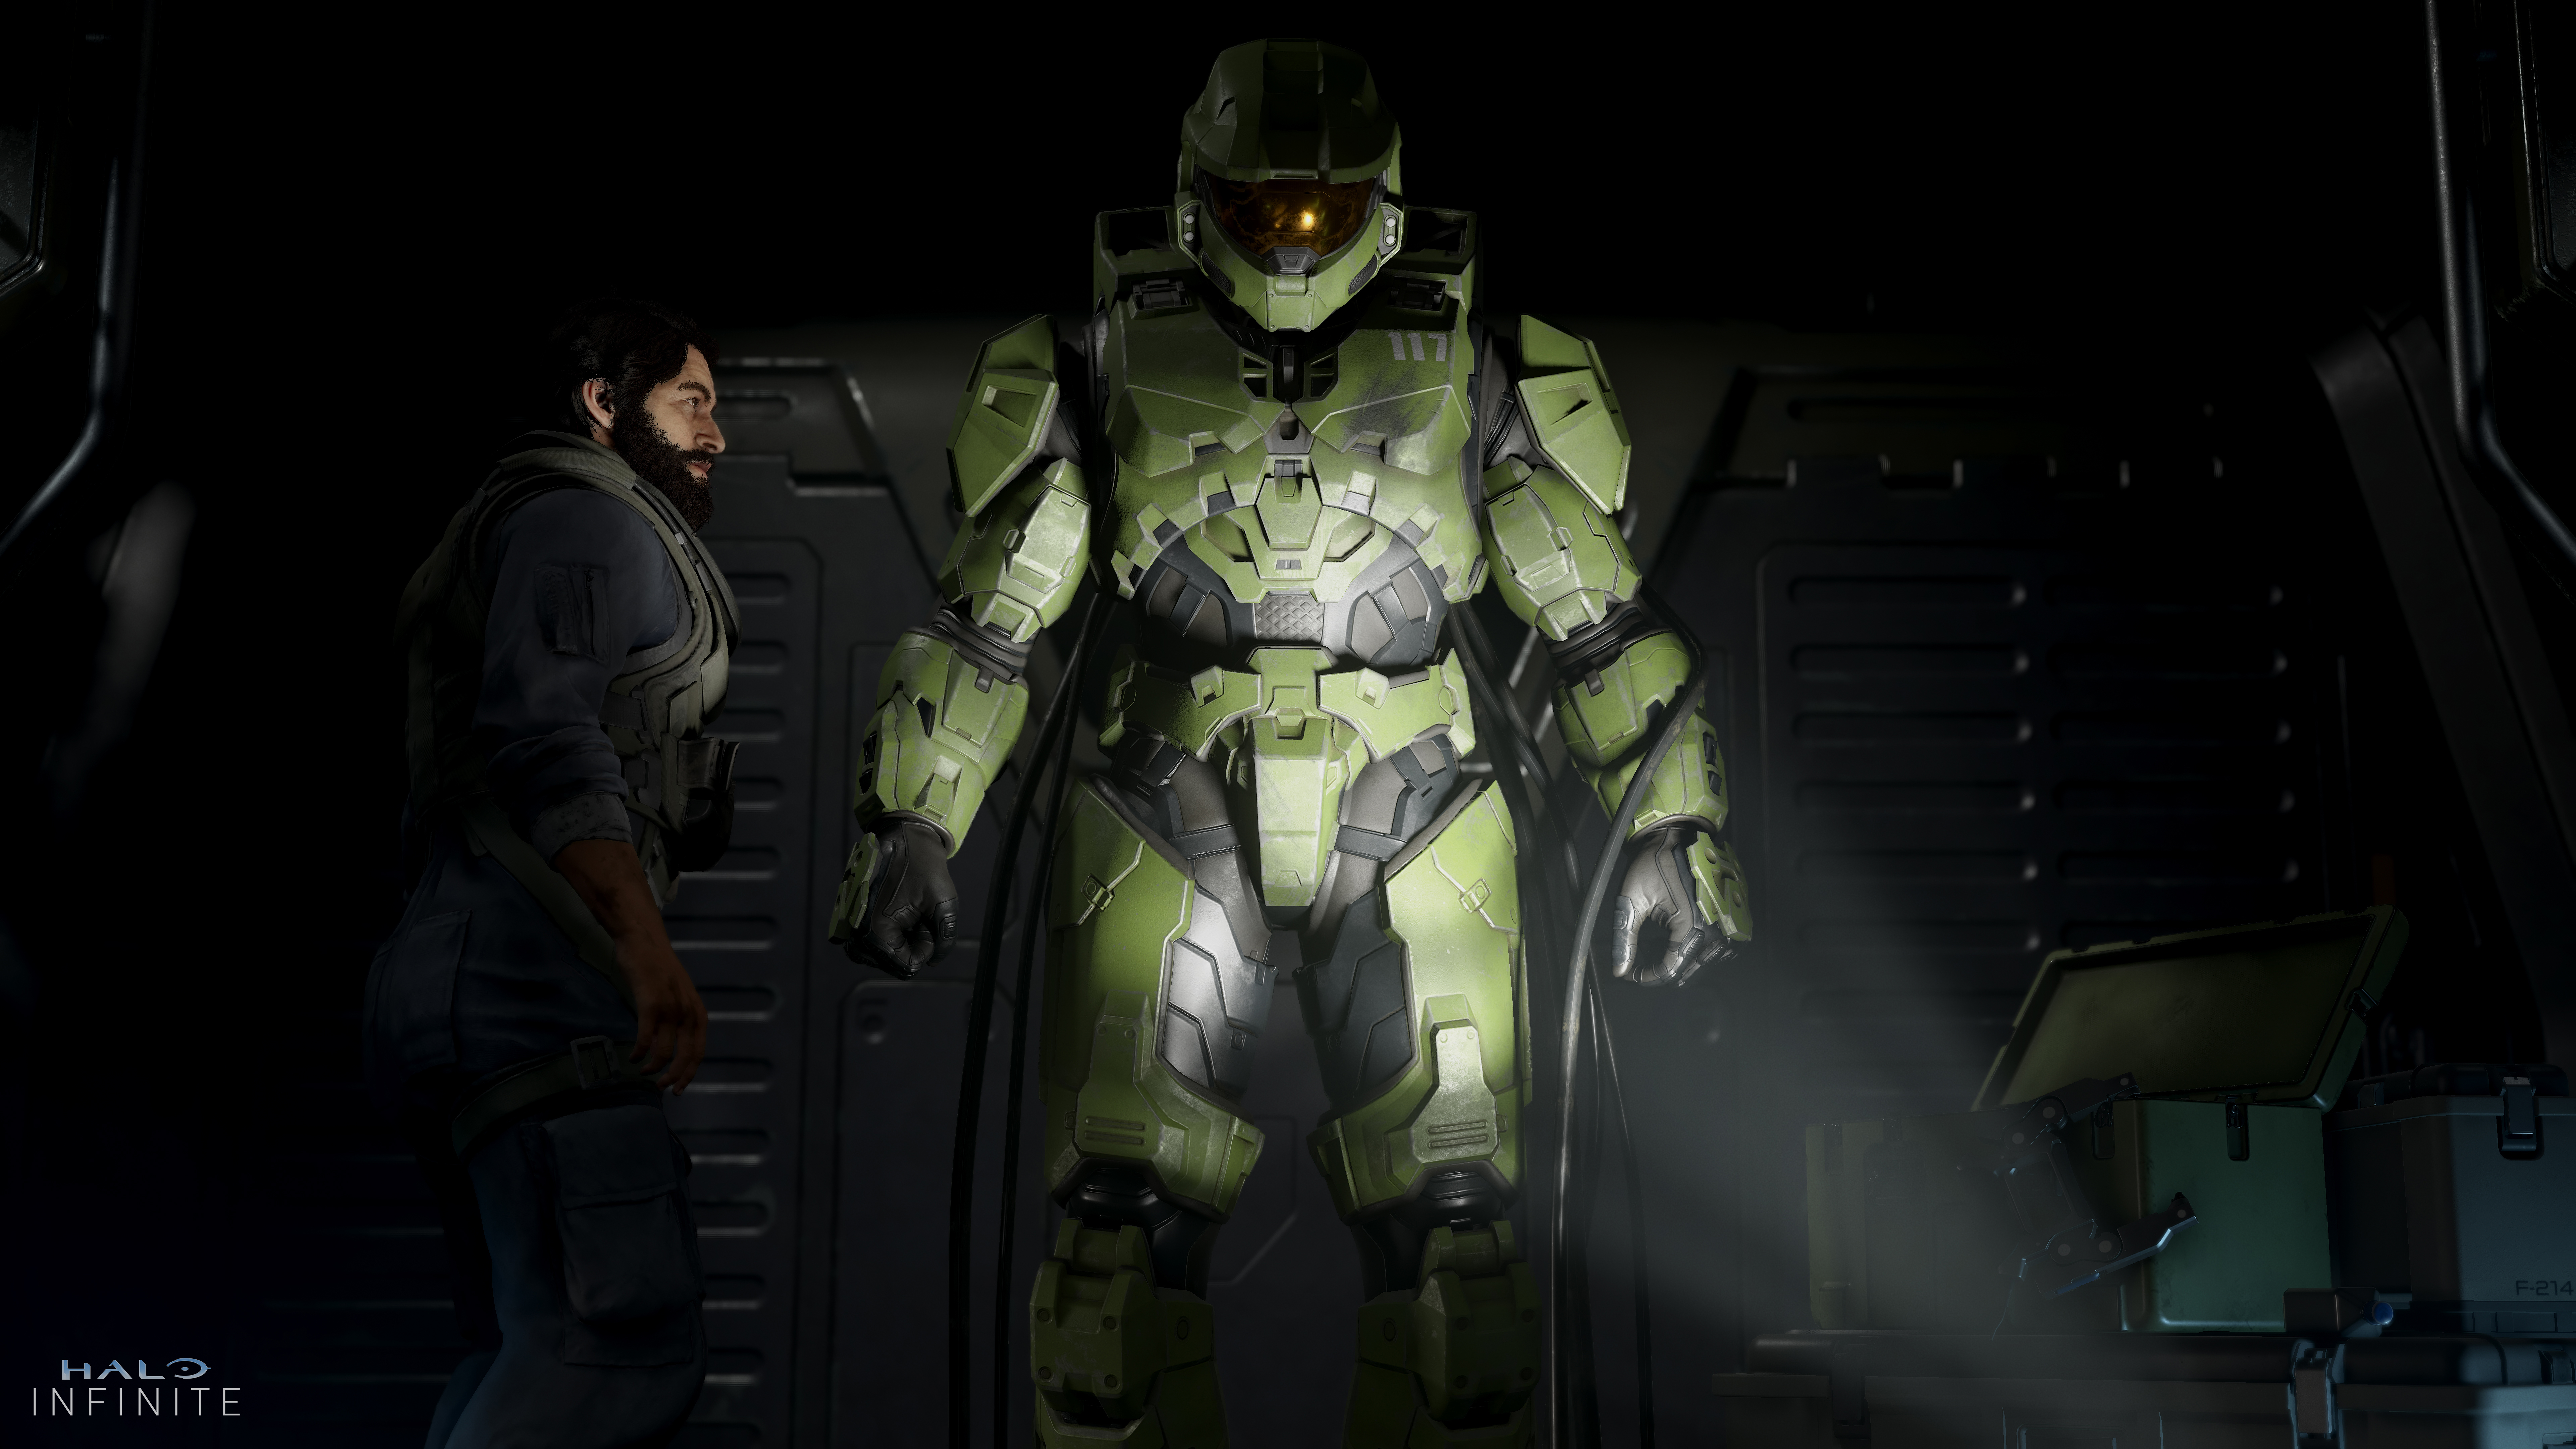 General 7680x4320 Halo Infinite video games Master Chief (Halo) 343 Industries futuristic armor video game characters